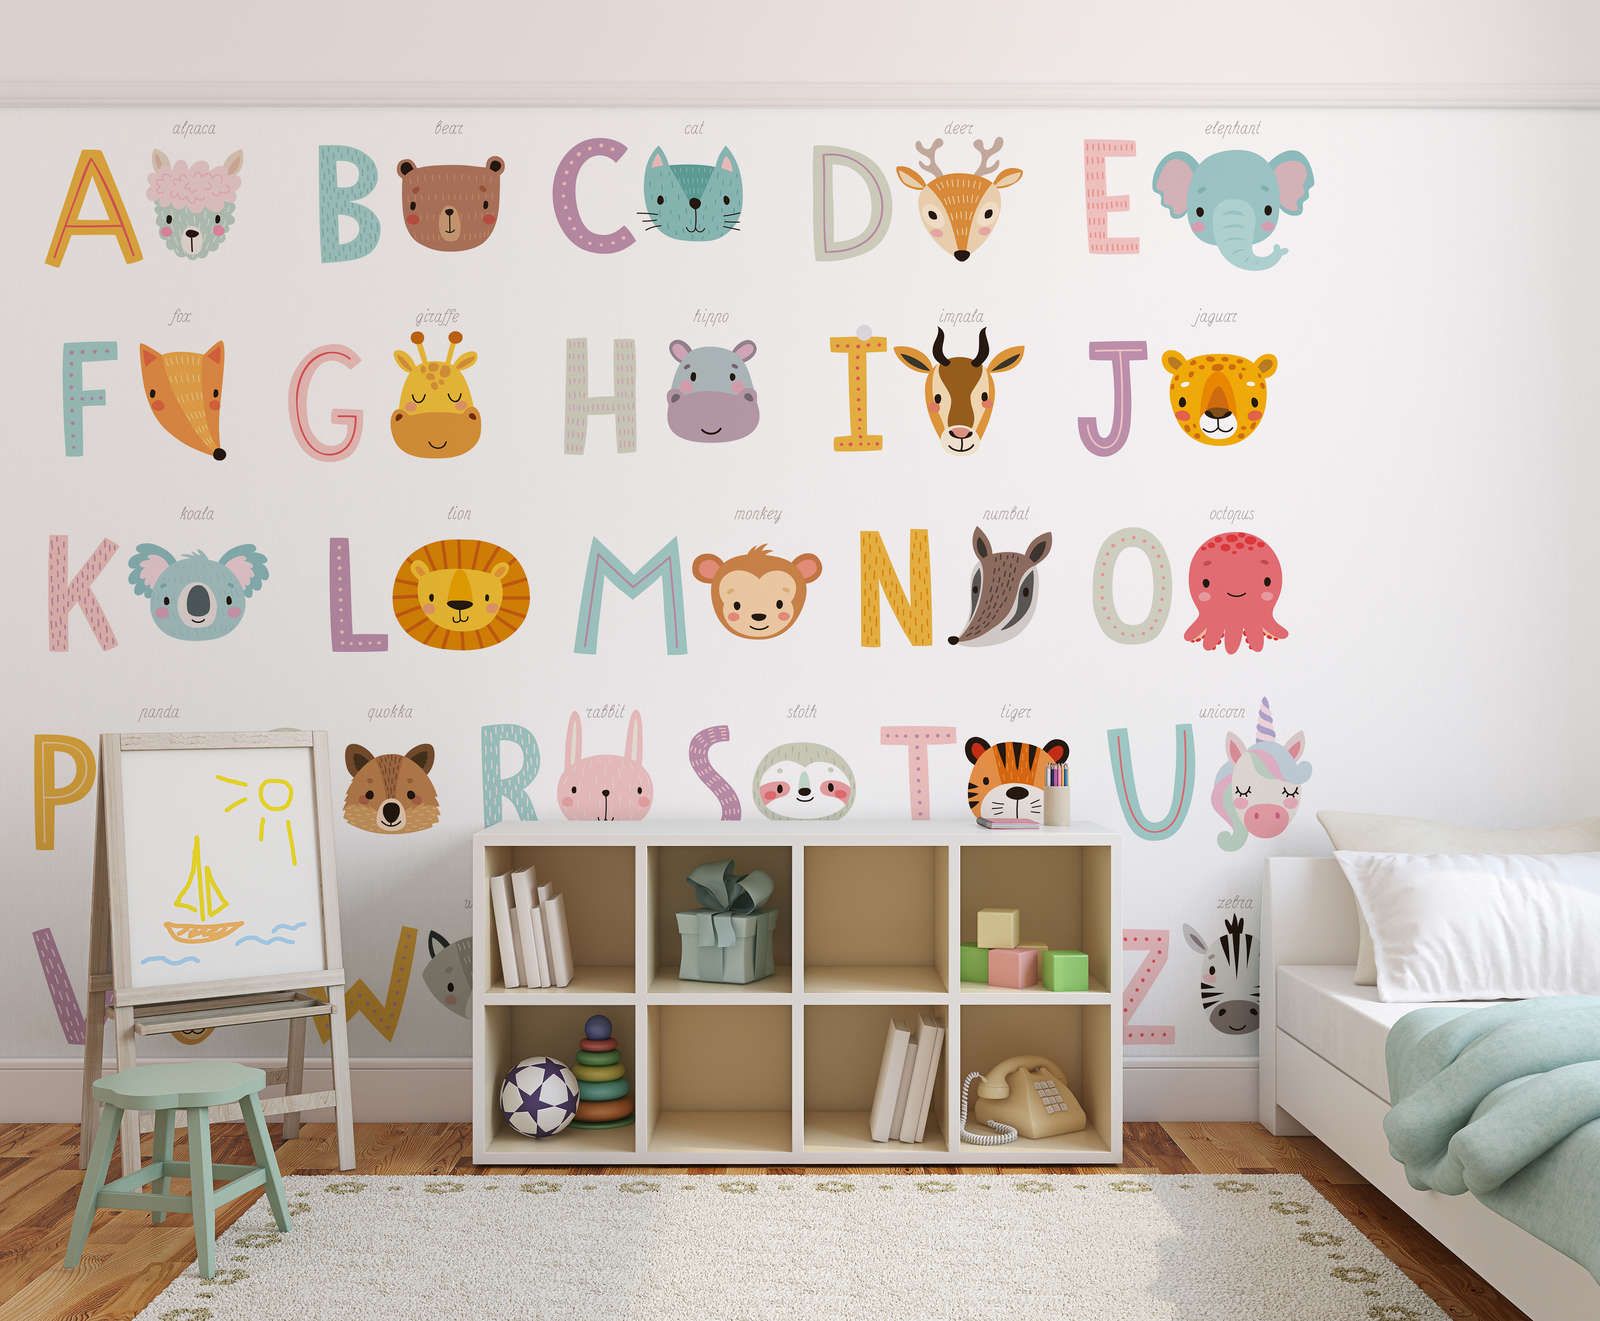             Photo wallpaper ABC with animals and animal names - Smooth & slightly shiny non-woven
        